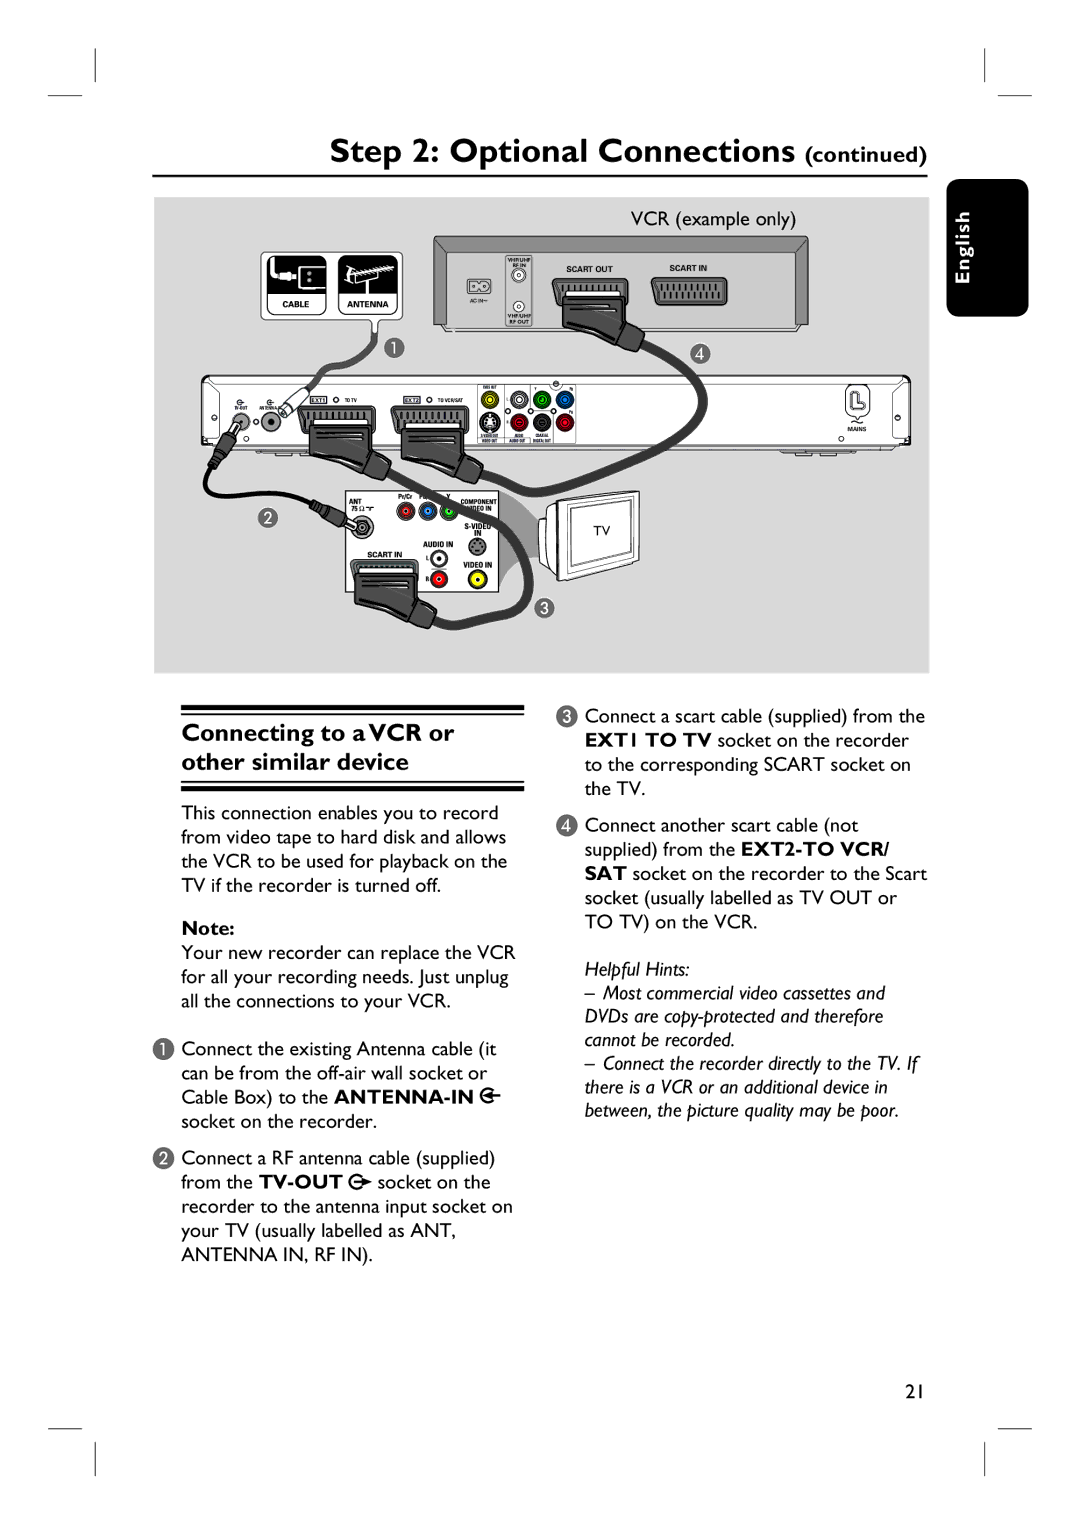 ProForm DVDR3570H user manual Connecting to a VCR or other similar device, VCR example only 